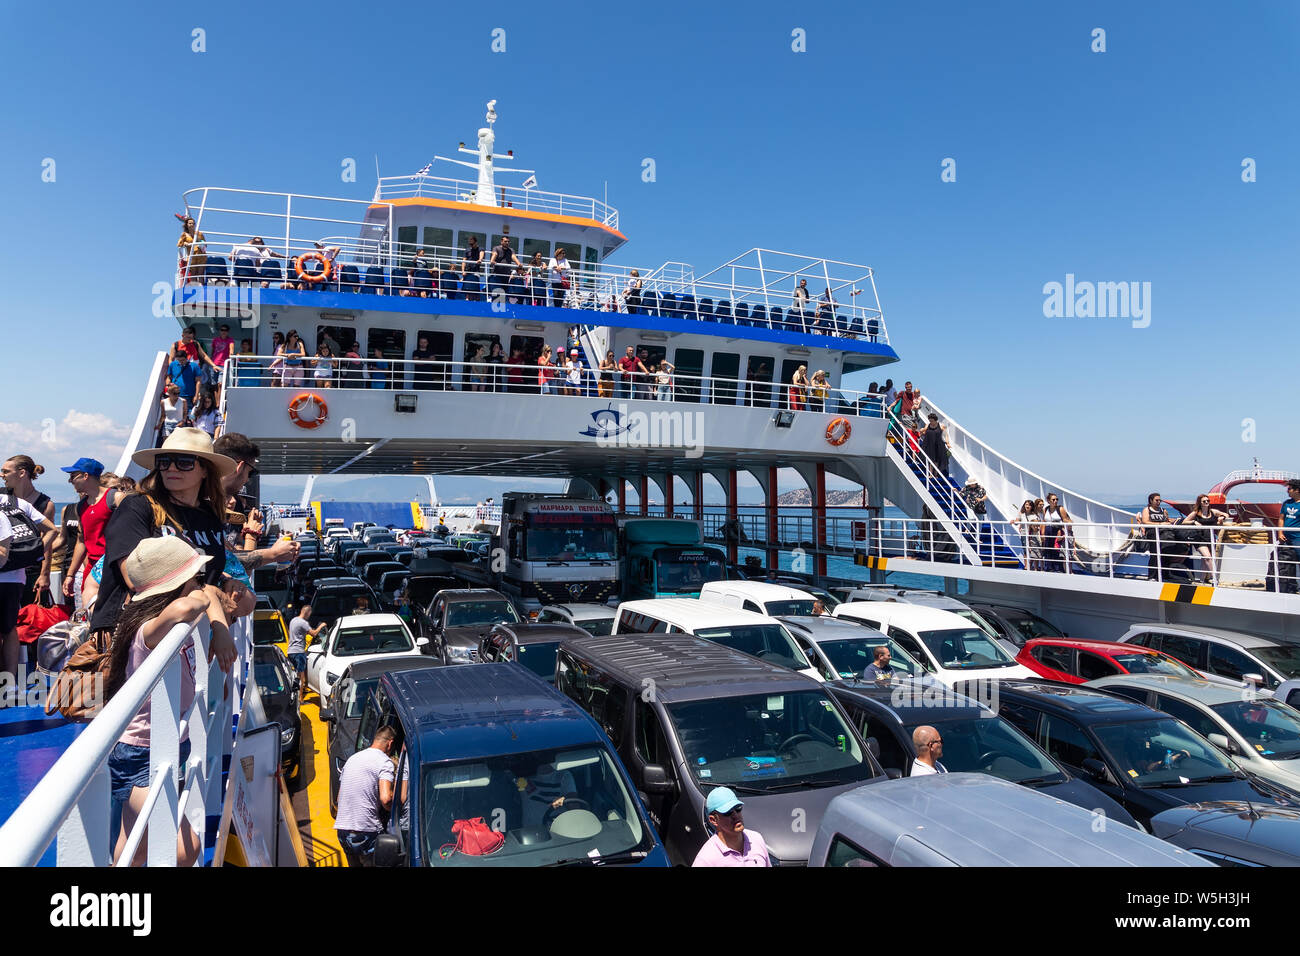 Thassos, Greece - July 20, 2019: Big ferry boat deck with passengers and cars, runs from Keramoti city to Thassos island. Stock Photo